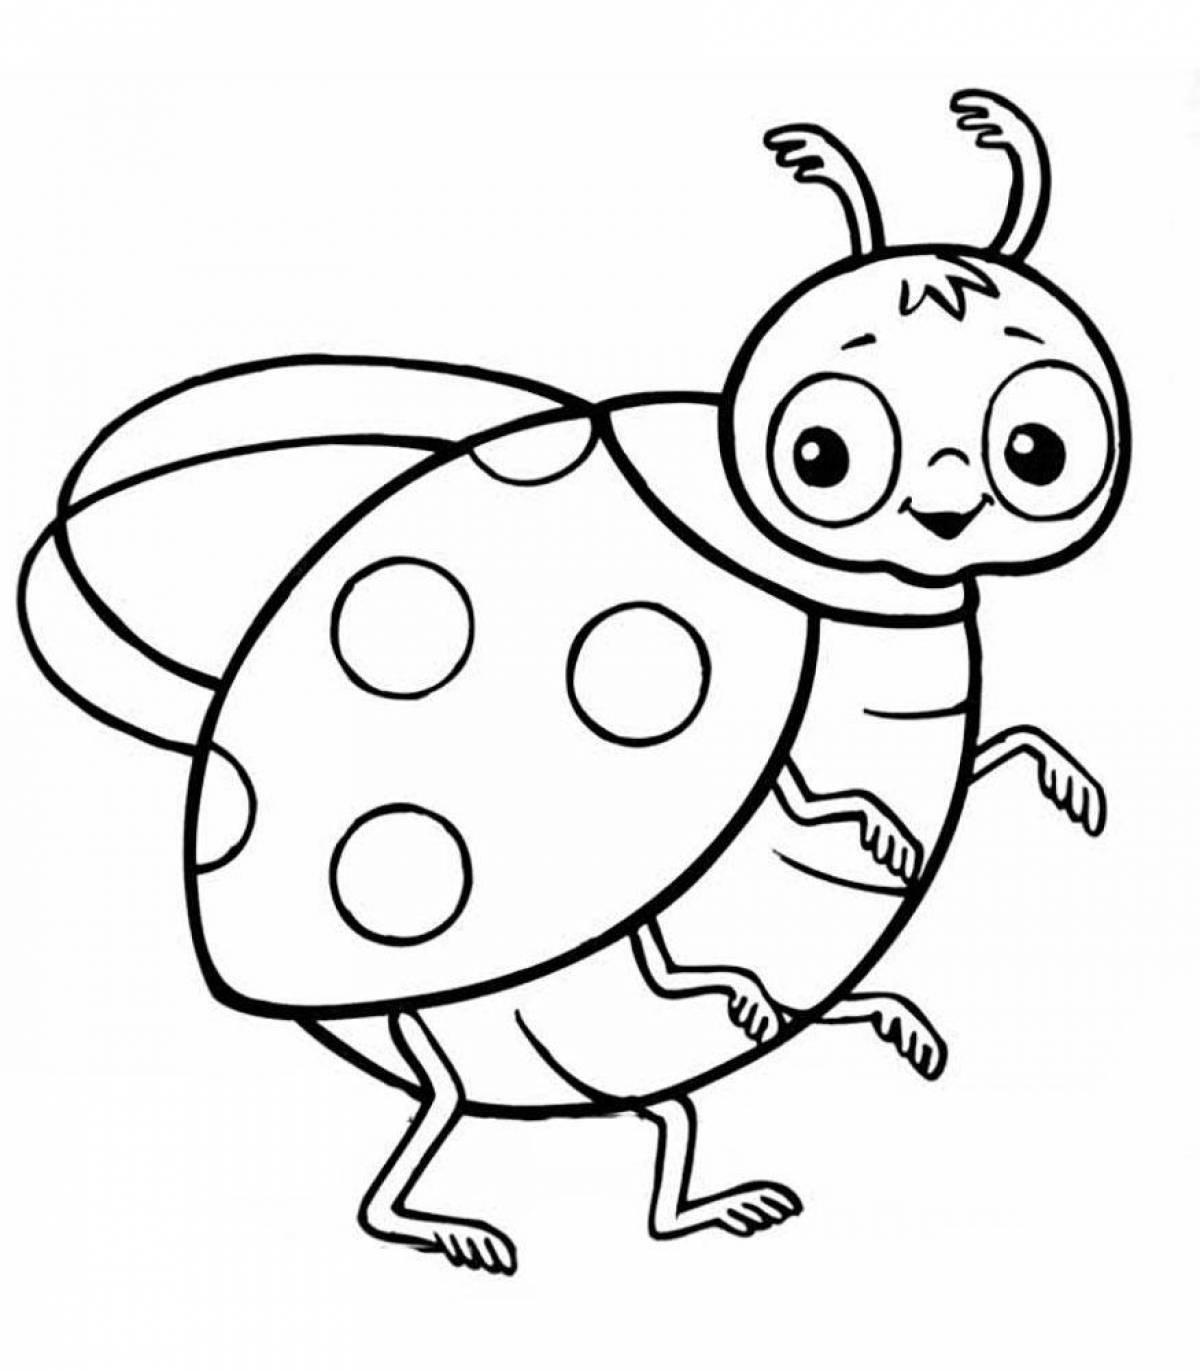 Colorful ladybug coloring book for babies